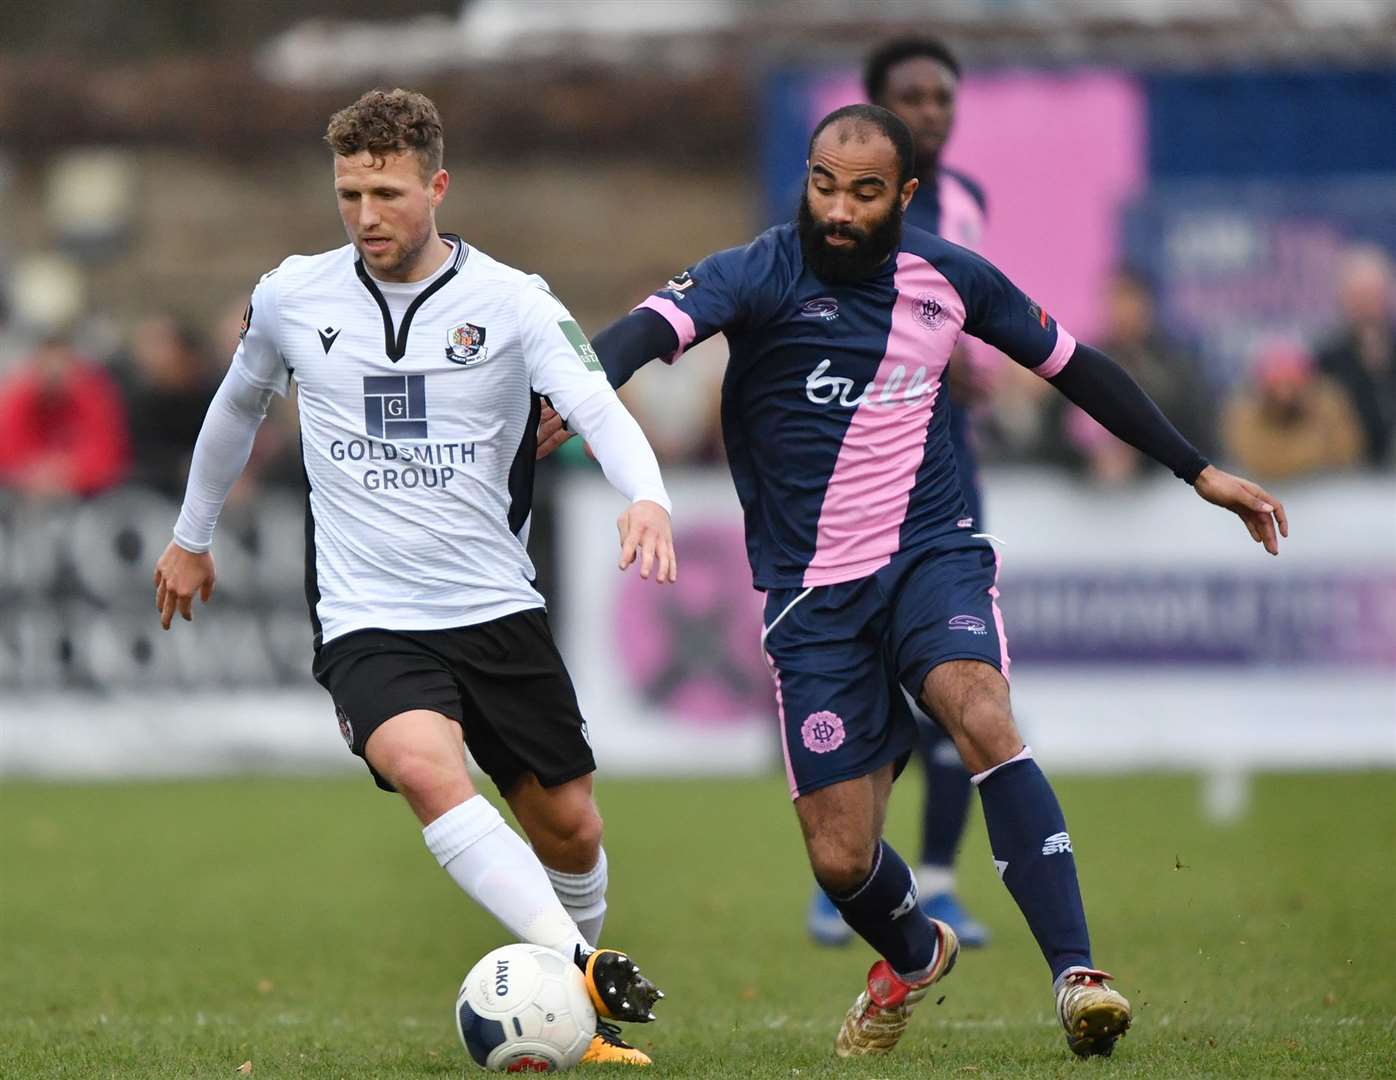 Dartford's Billy Crook is closed down by Dulwich's Dominic Vose. Picture: Keith Gillard